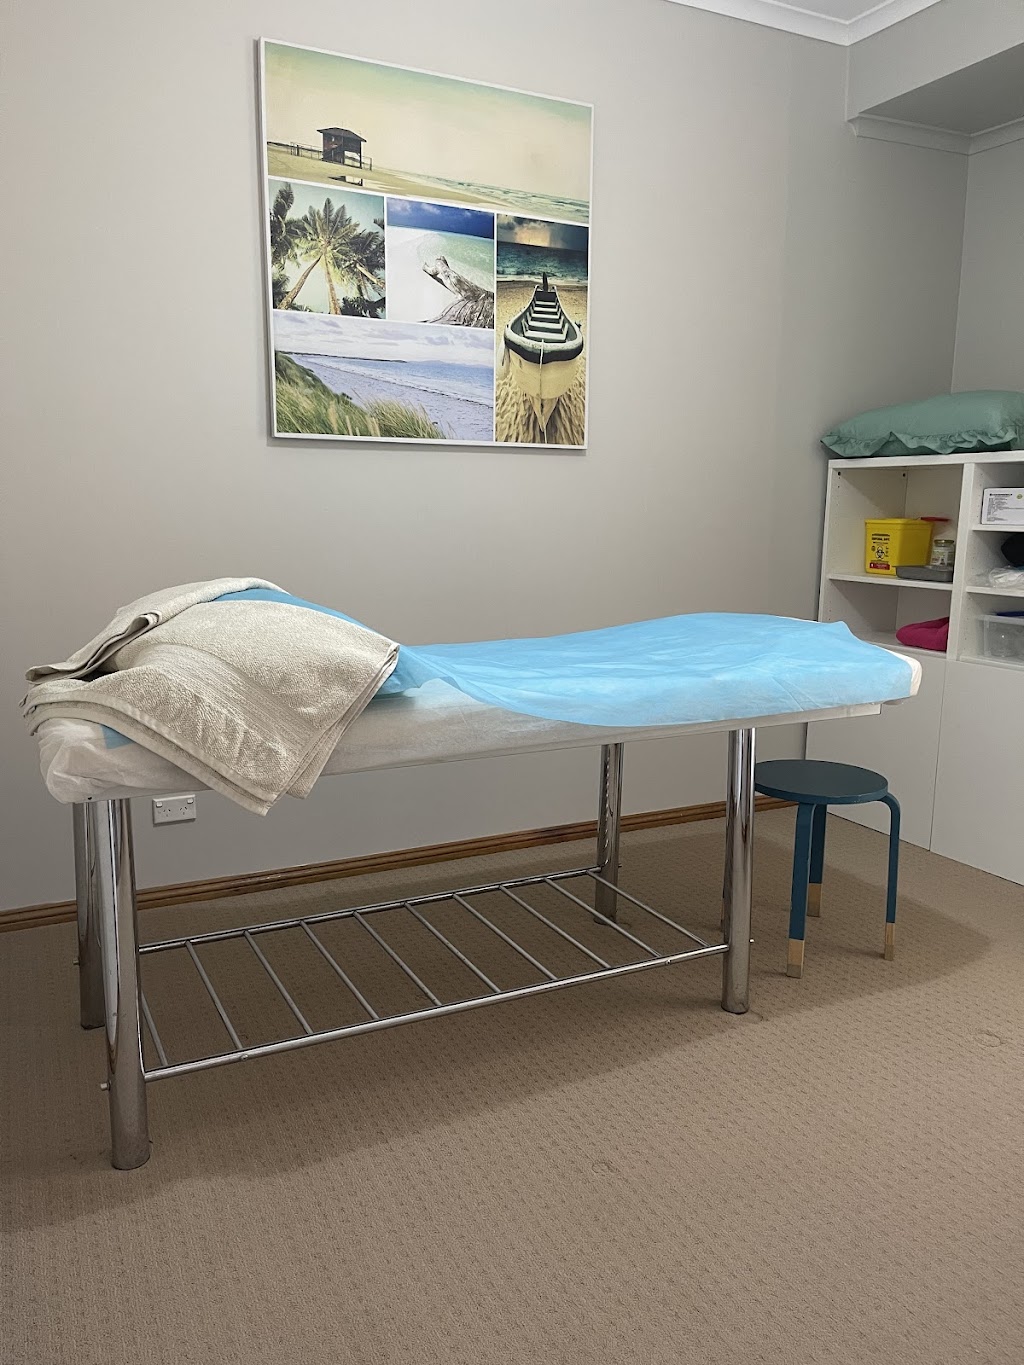 Seaside TCM Natural Therapy | health | 15A Fourth St, Ardrossan SA 5571, Australia | 0480196308 OR +61 480 196 308